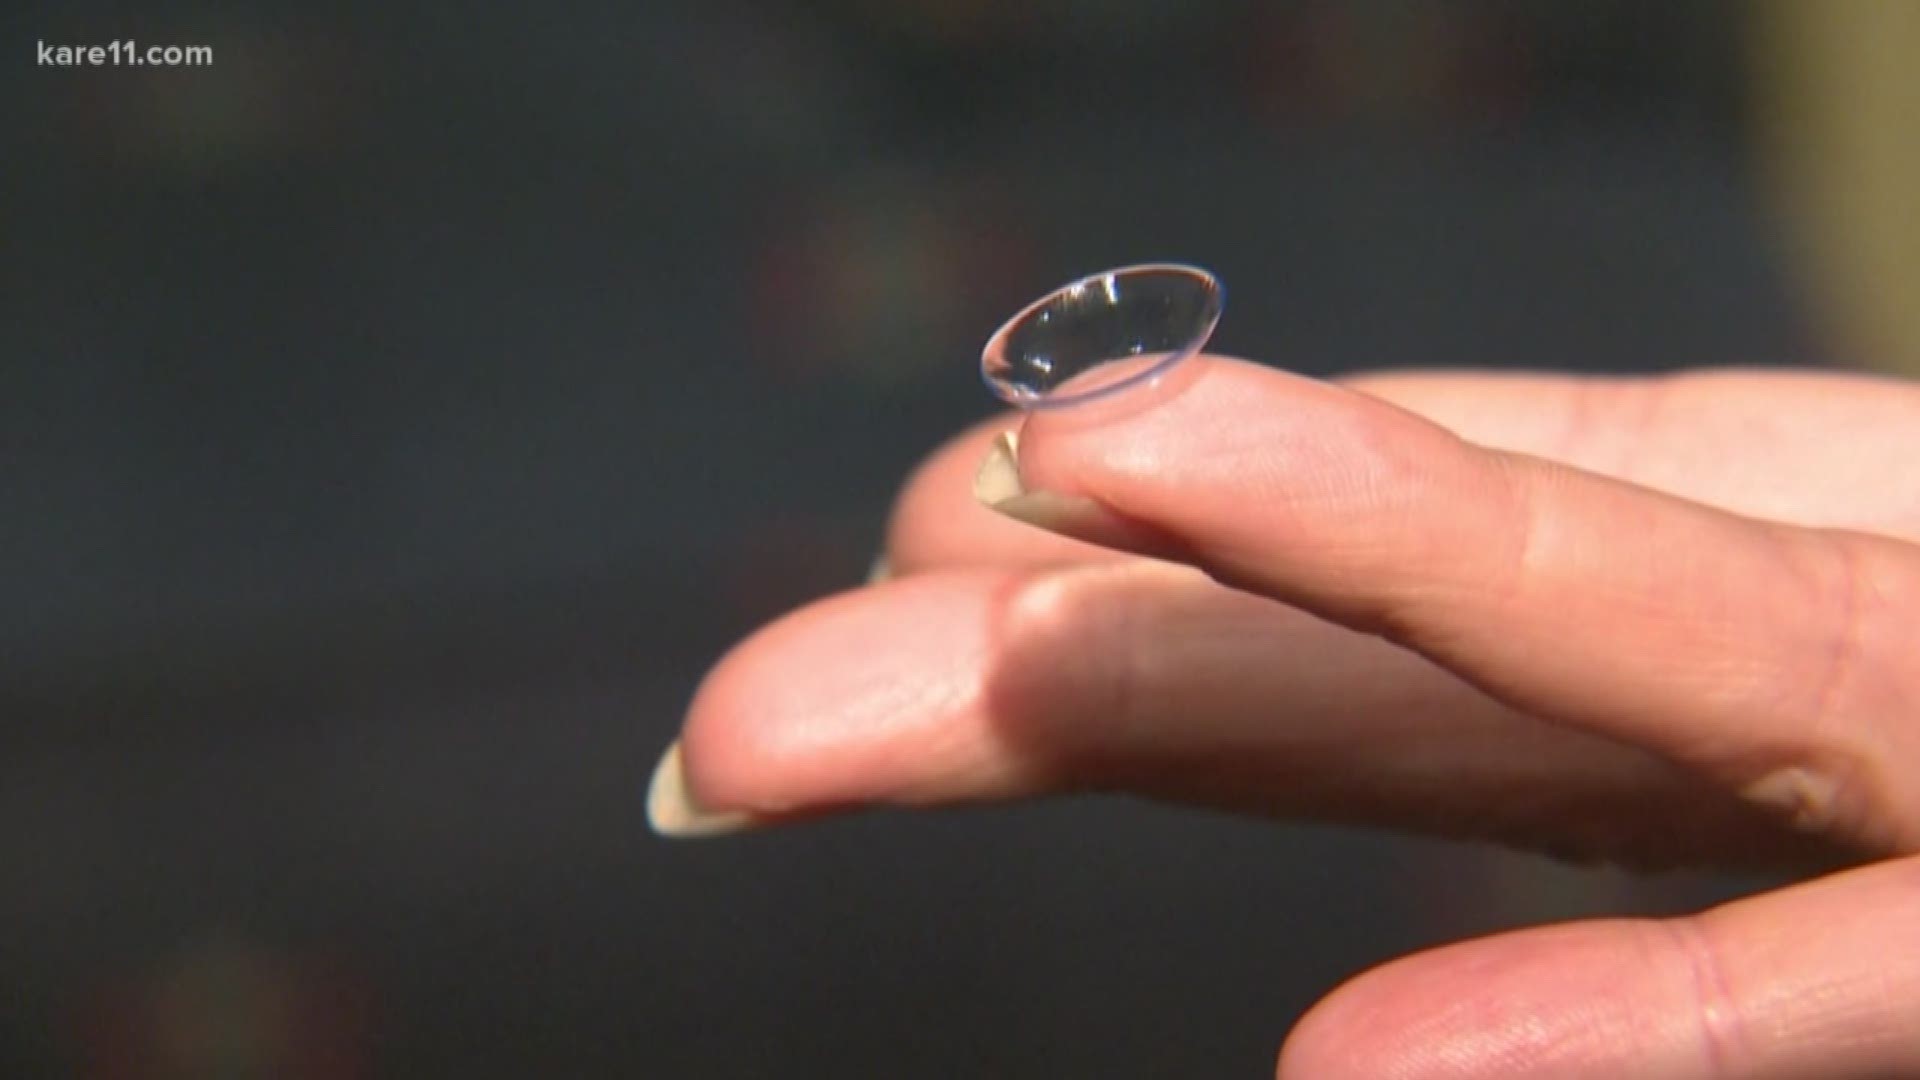 Whether you toss them in the sink or flush them down the toilet, new research on contact lenses suggests neither are great options. https://kare11.tv/2BuwgaC